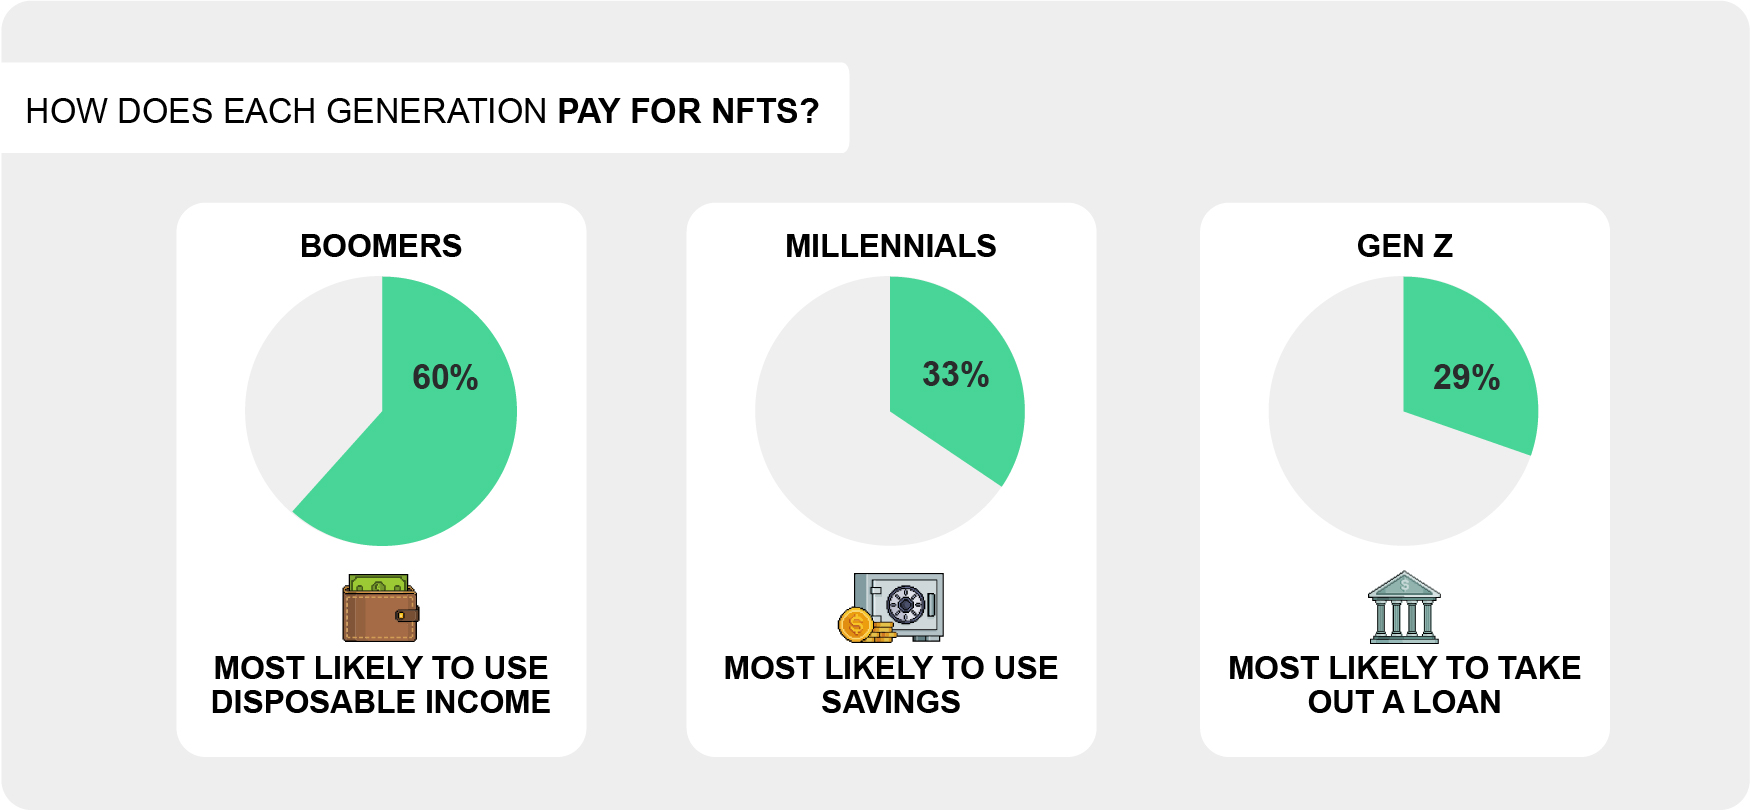 How does each generation pay for NFTs?